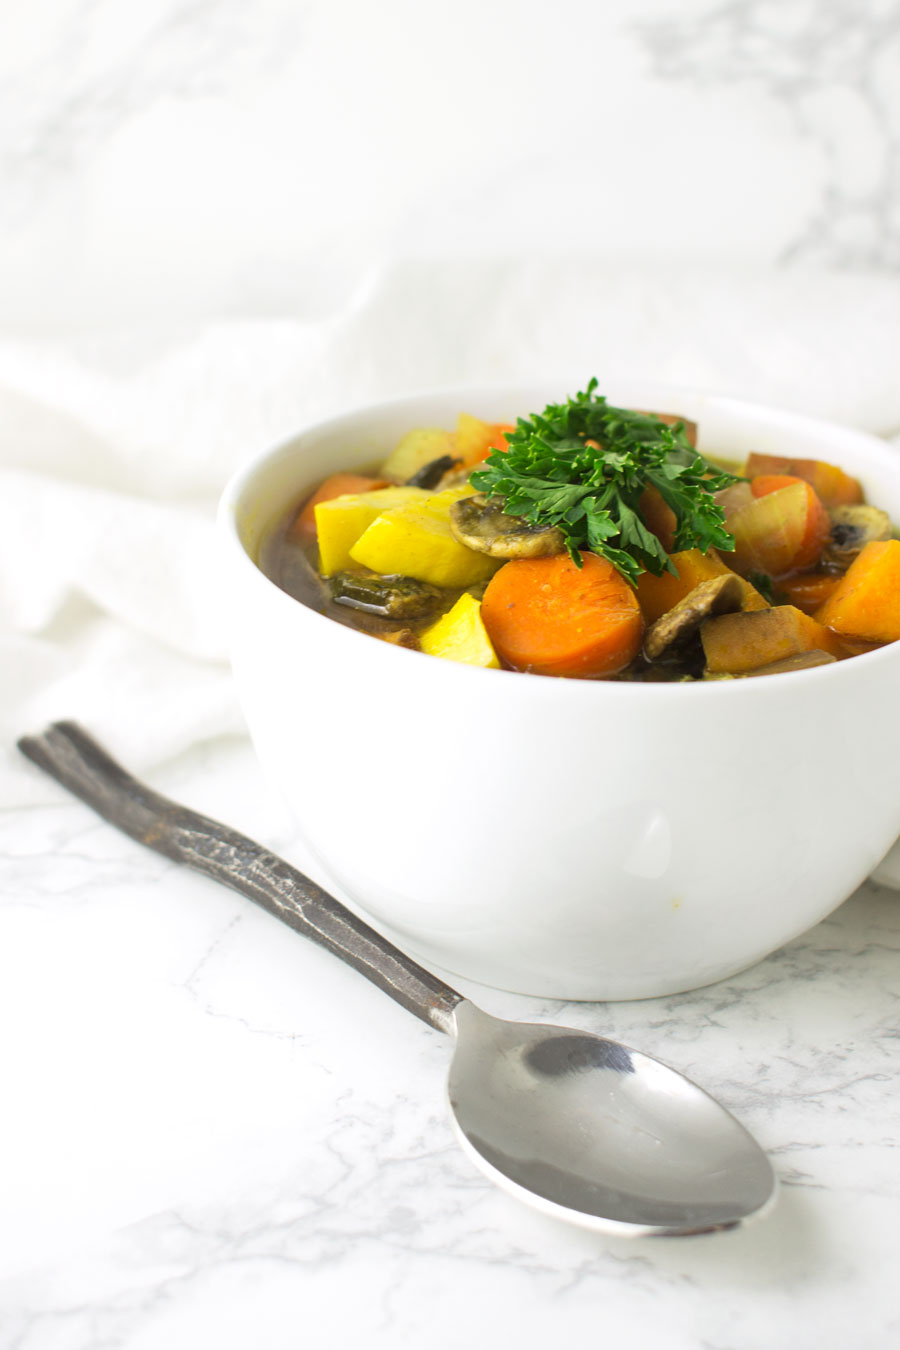 Curried Vegetable Soup recipe from acleanplate.com #aip #paleo #glutenfree